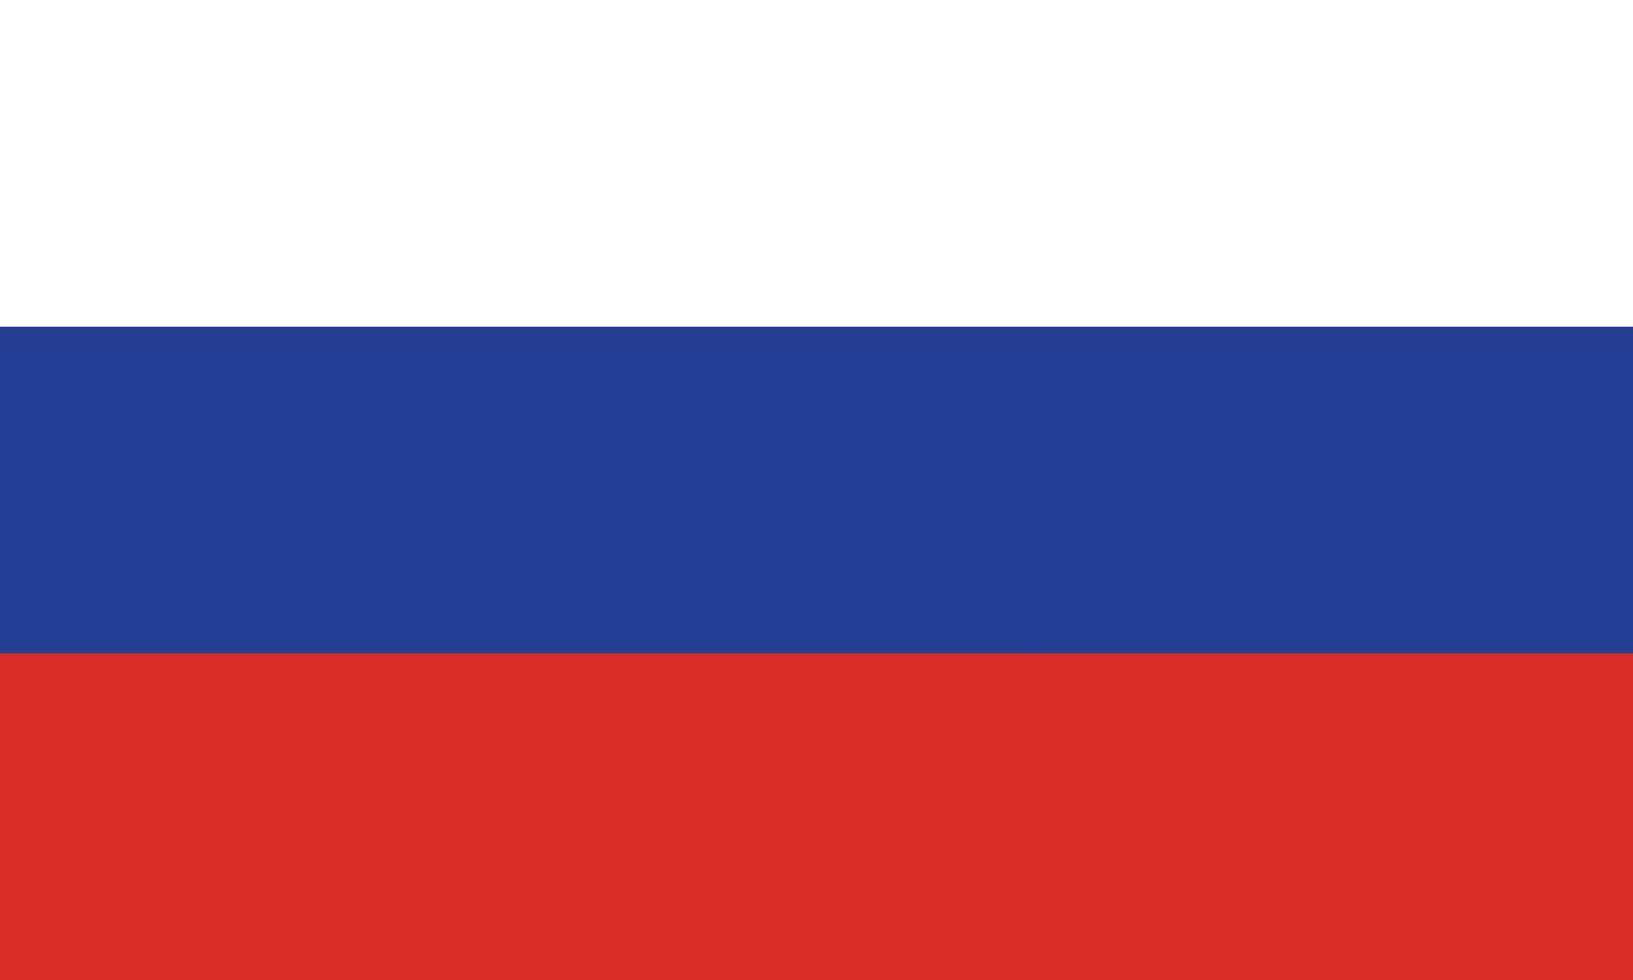 National flag of Russia vector illustration. Russian flag